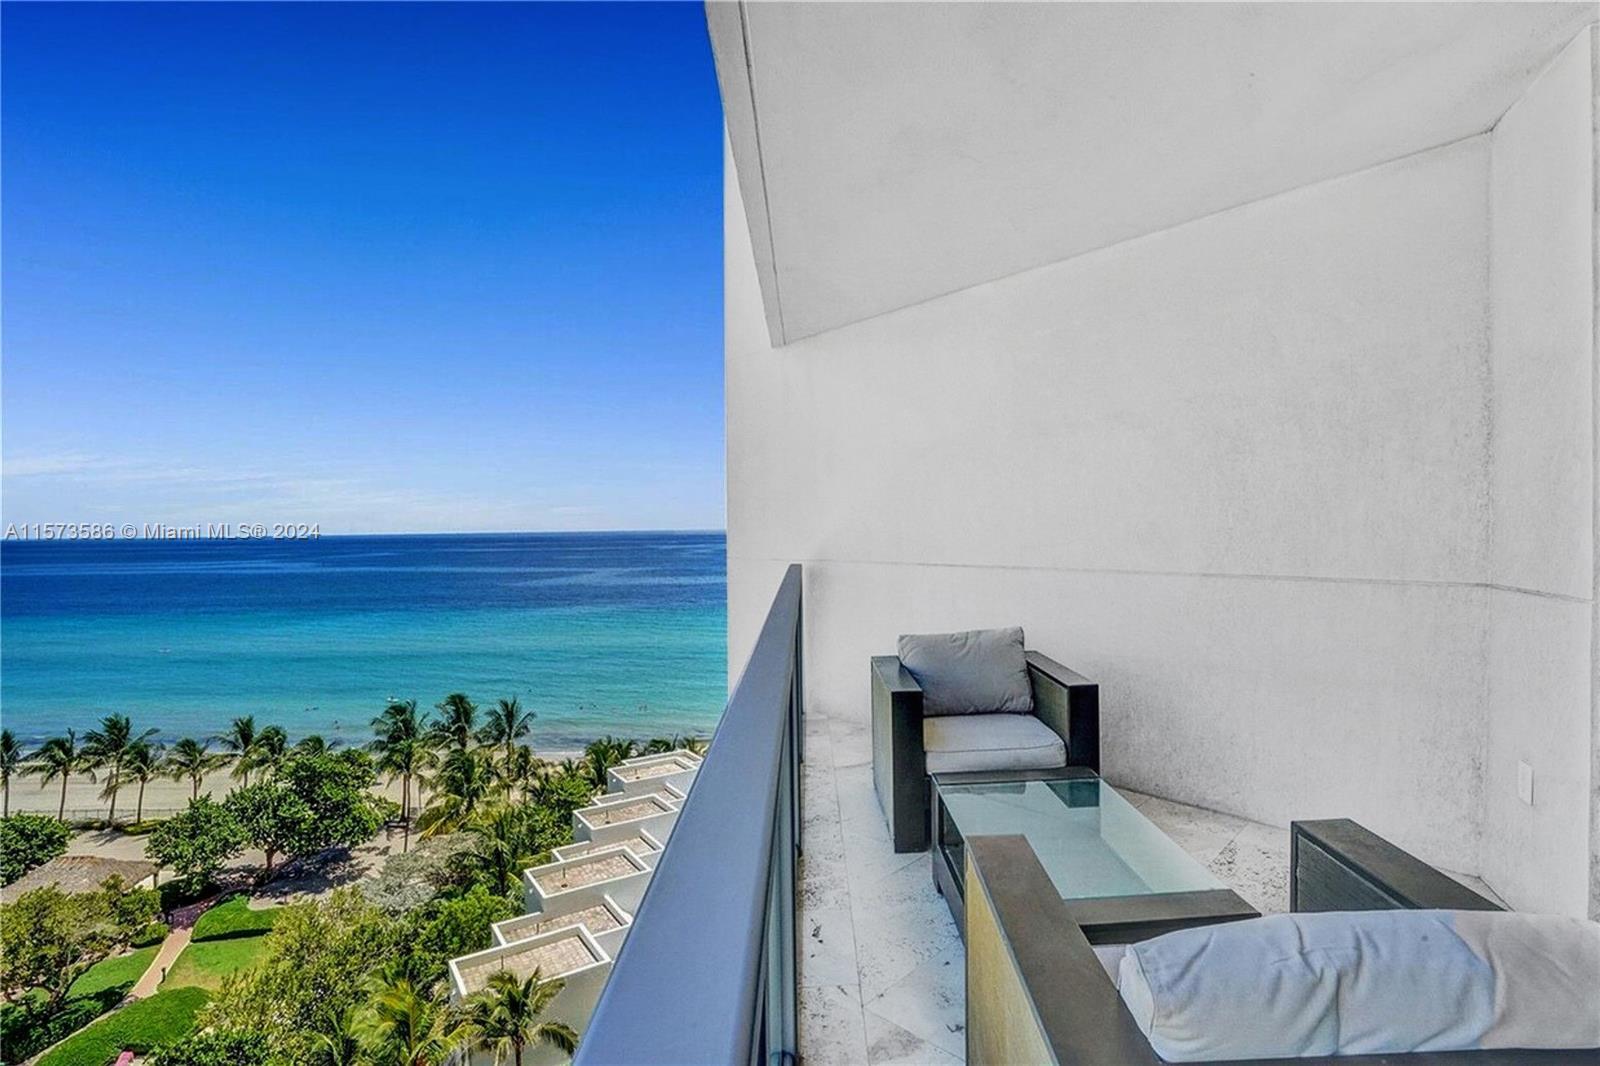 Photo of 3101 S Ocean Dr #1005 in Hollywood, FL